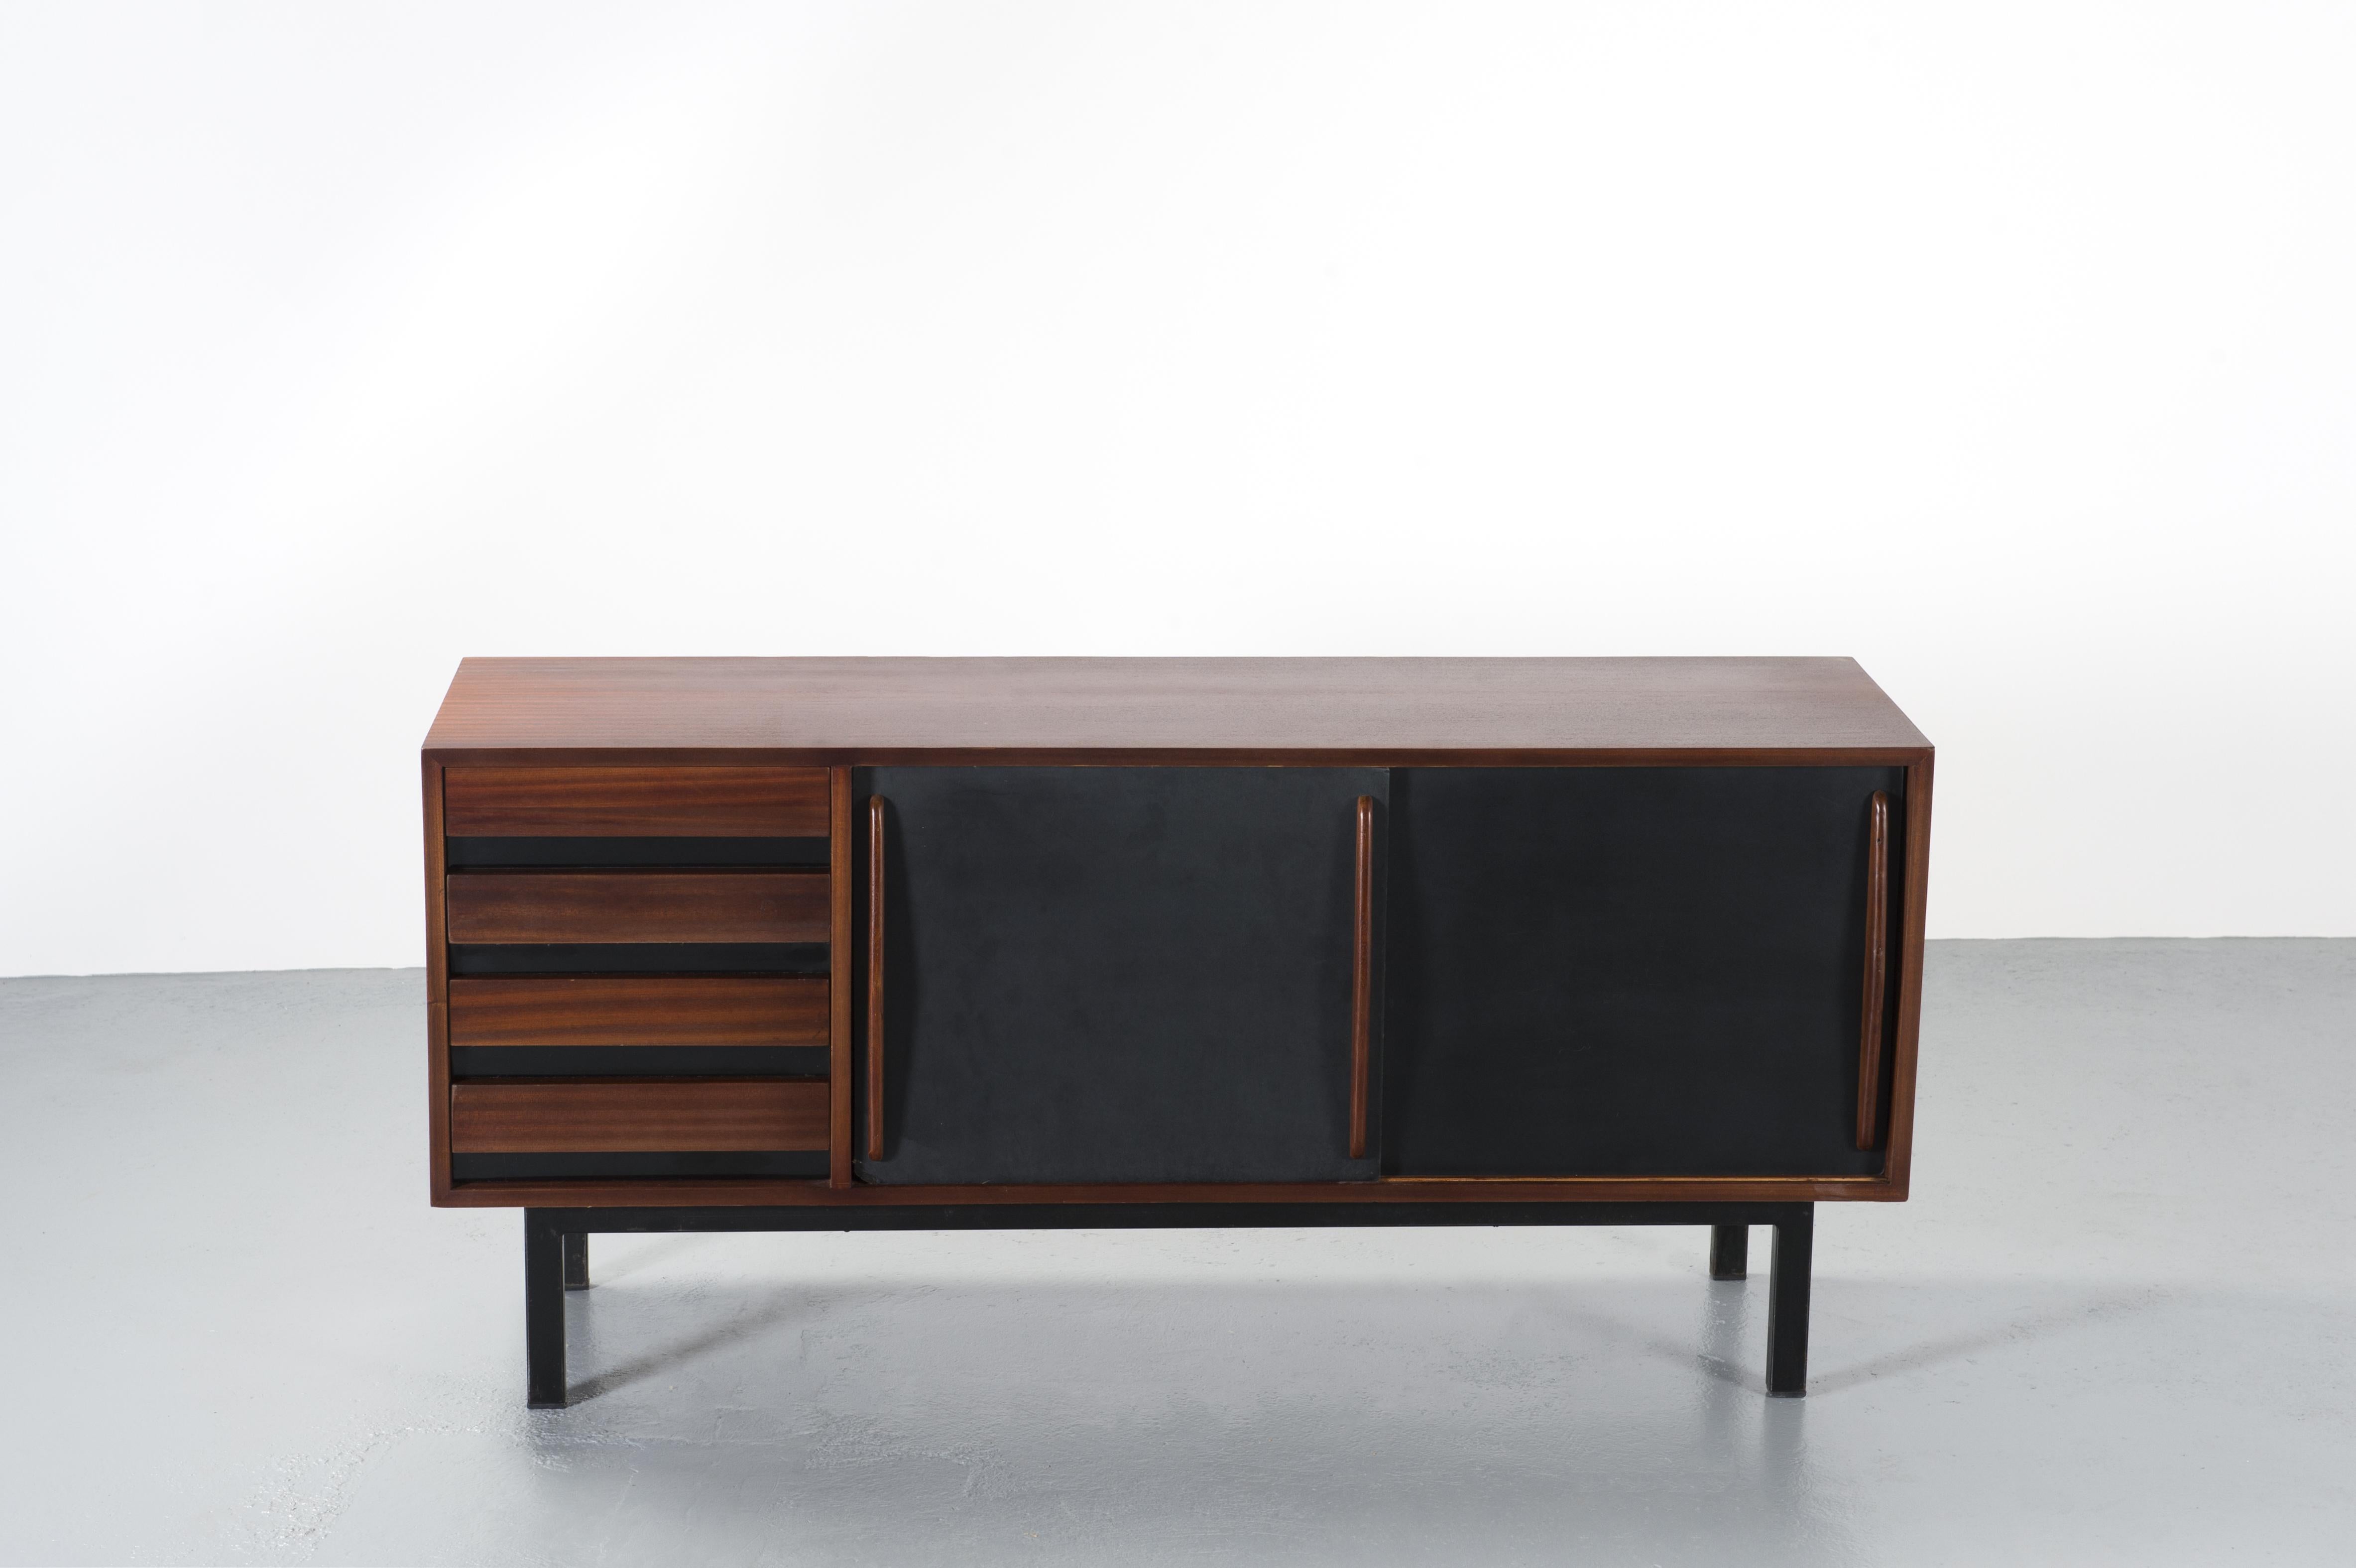 Cansado Mining Town Charlotte Perriand sideboard, circa 1960, Mauritania.

Sideboard in mahogany veneering, two sliding doors in black laminate formica and four drawers on the side. The base is in metal painted black.

Charlotte Perriand is a